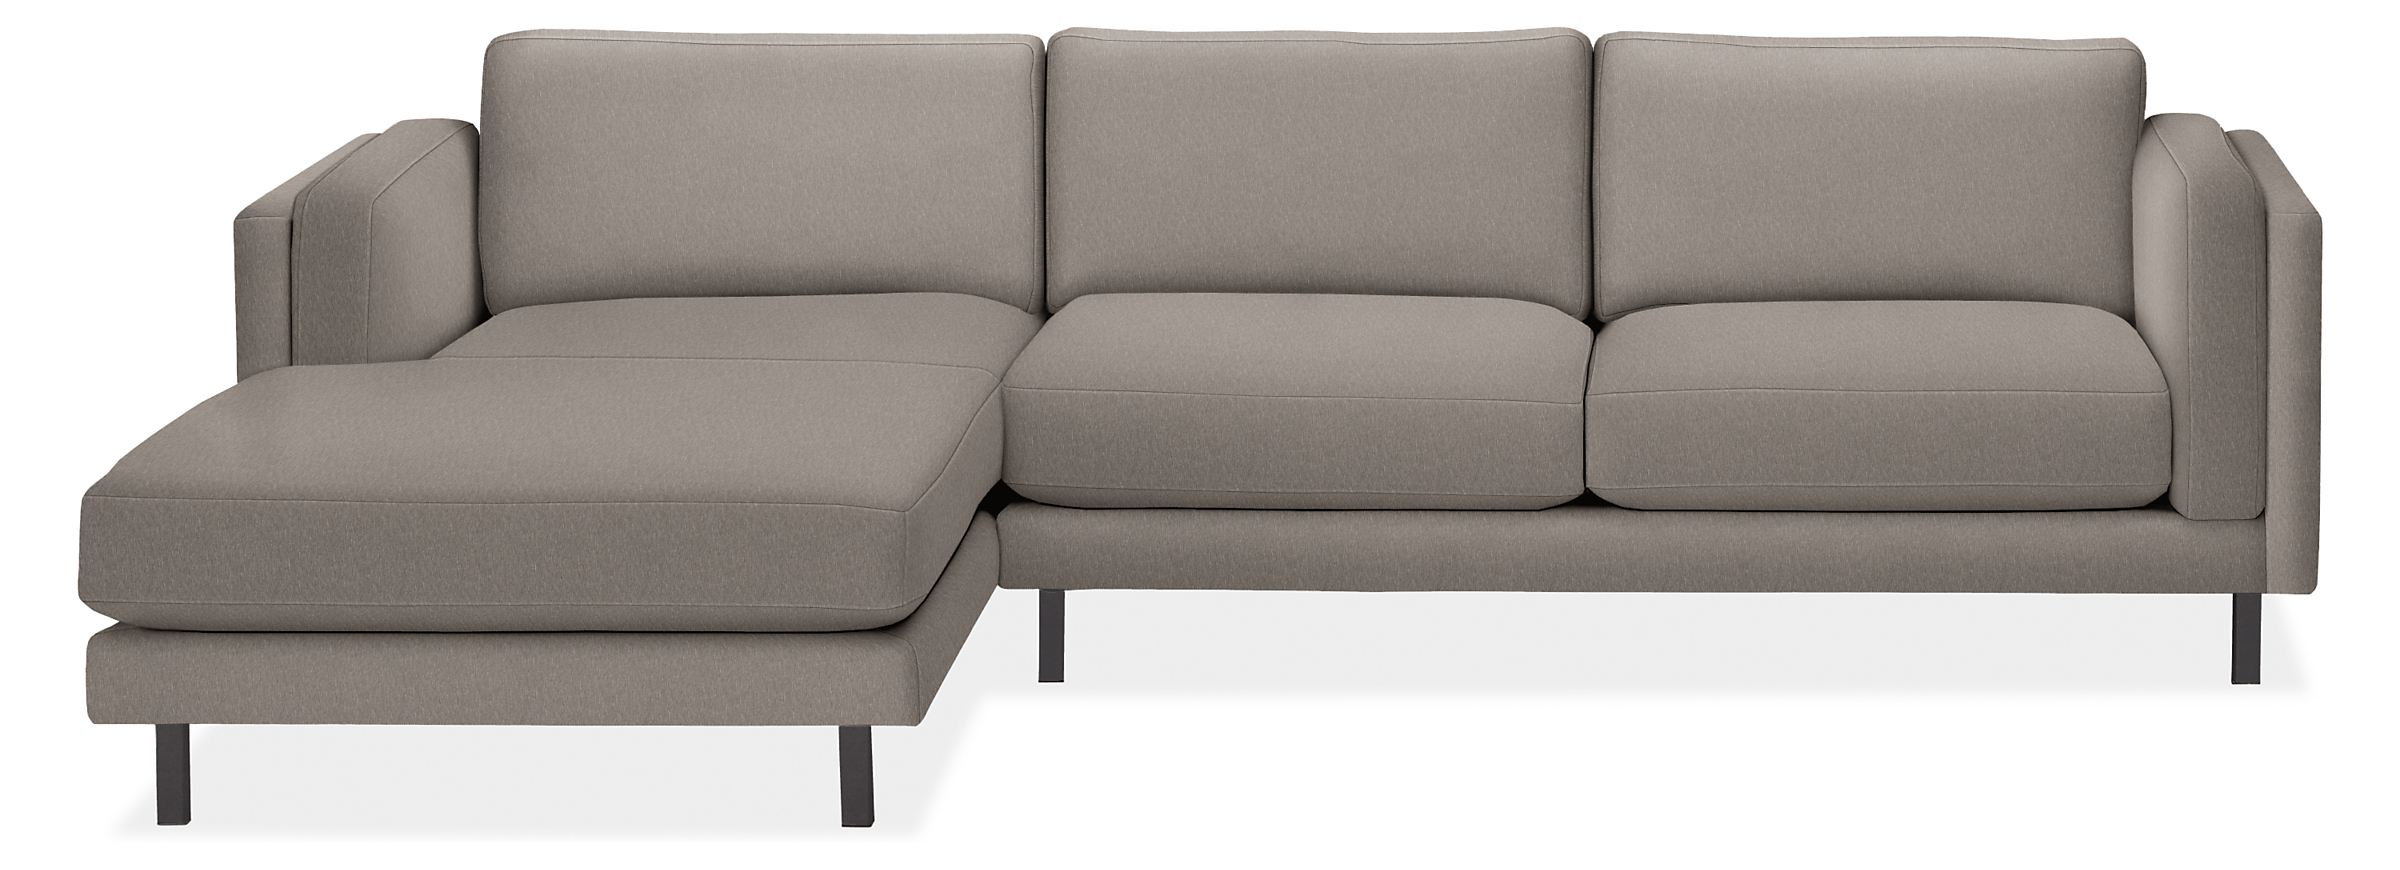 Cade Sofas with Chaise